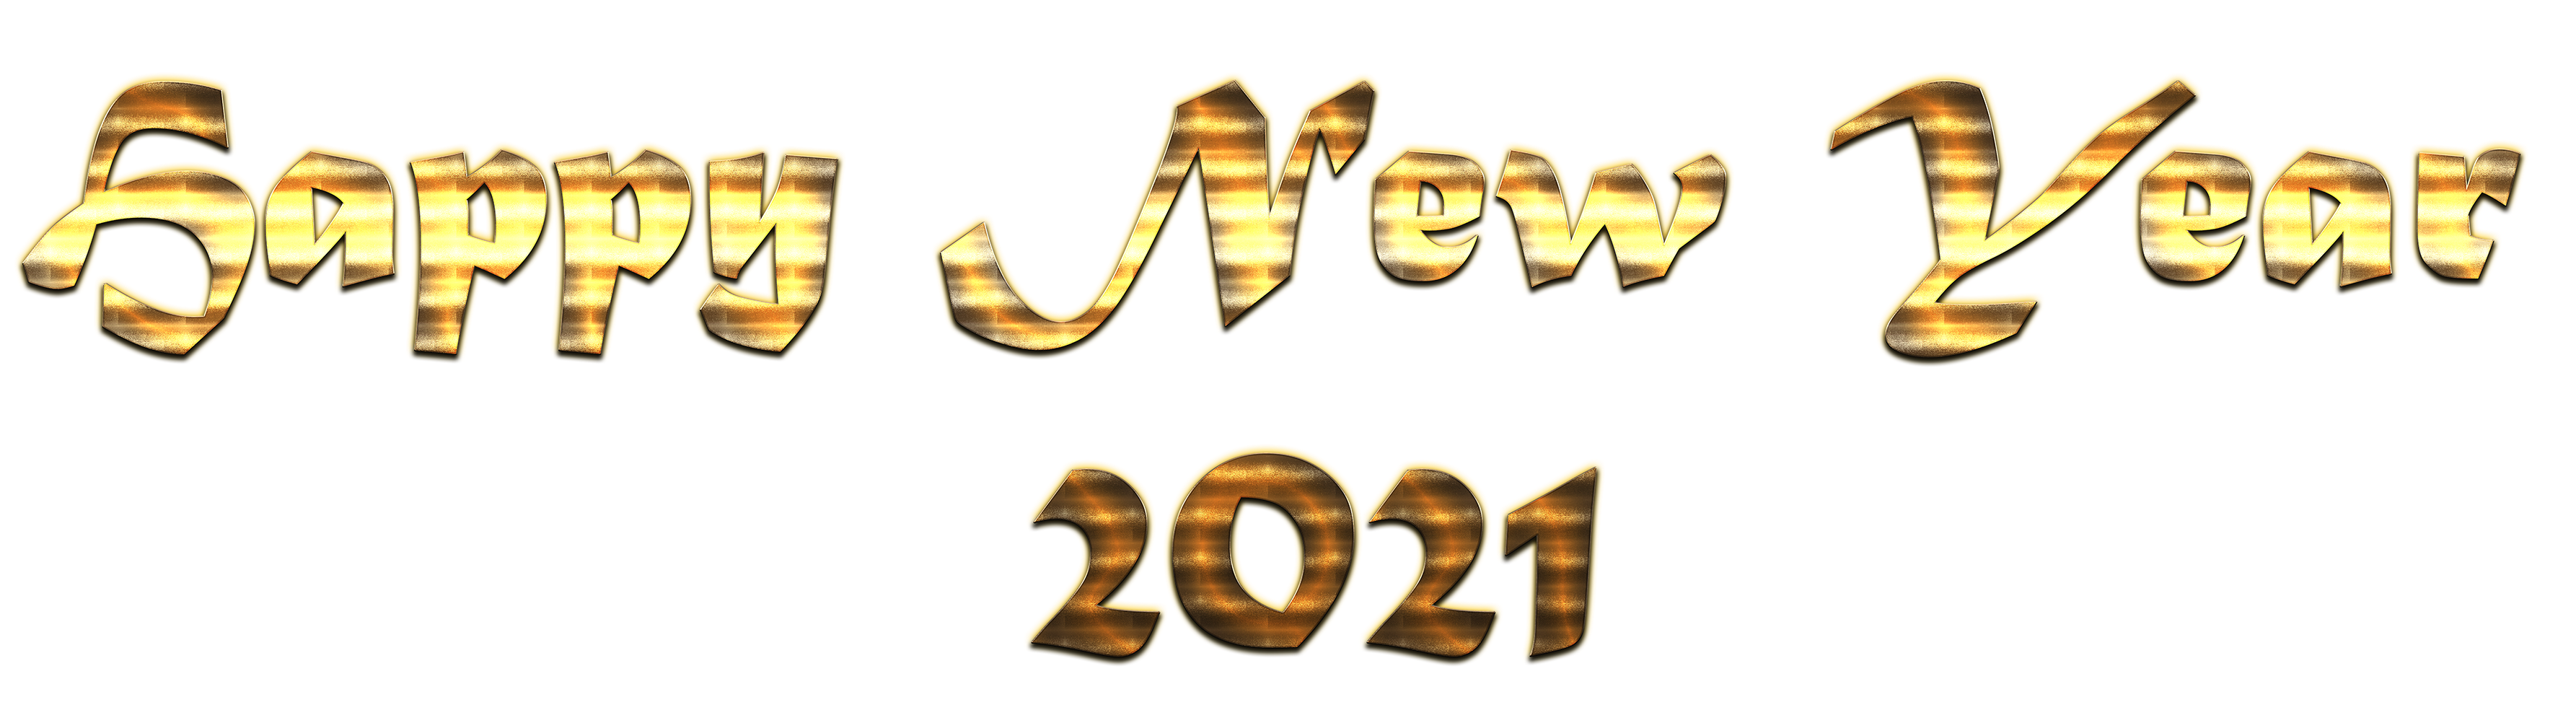 Photos Year 2021 Happy PNG Image High Quality PNG Image